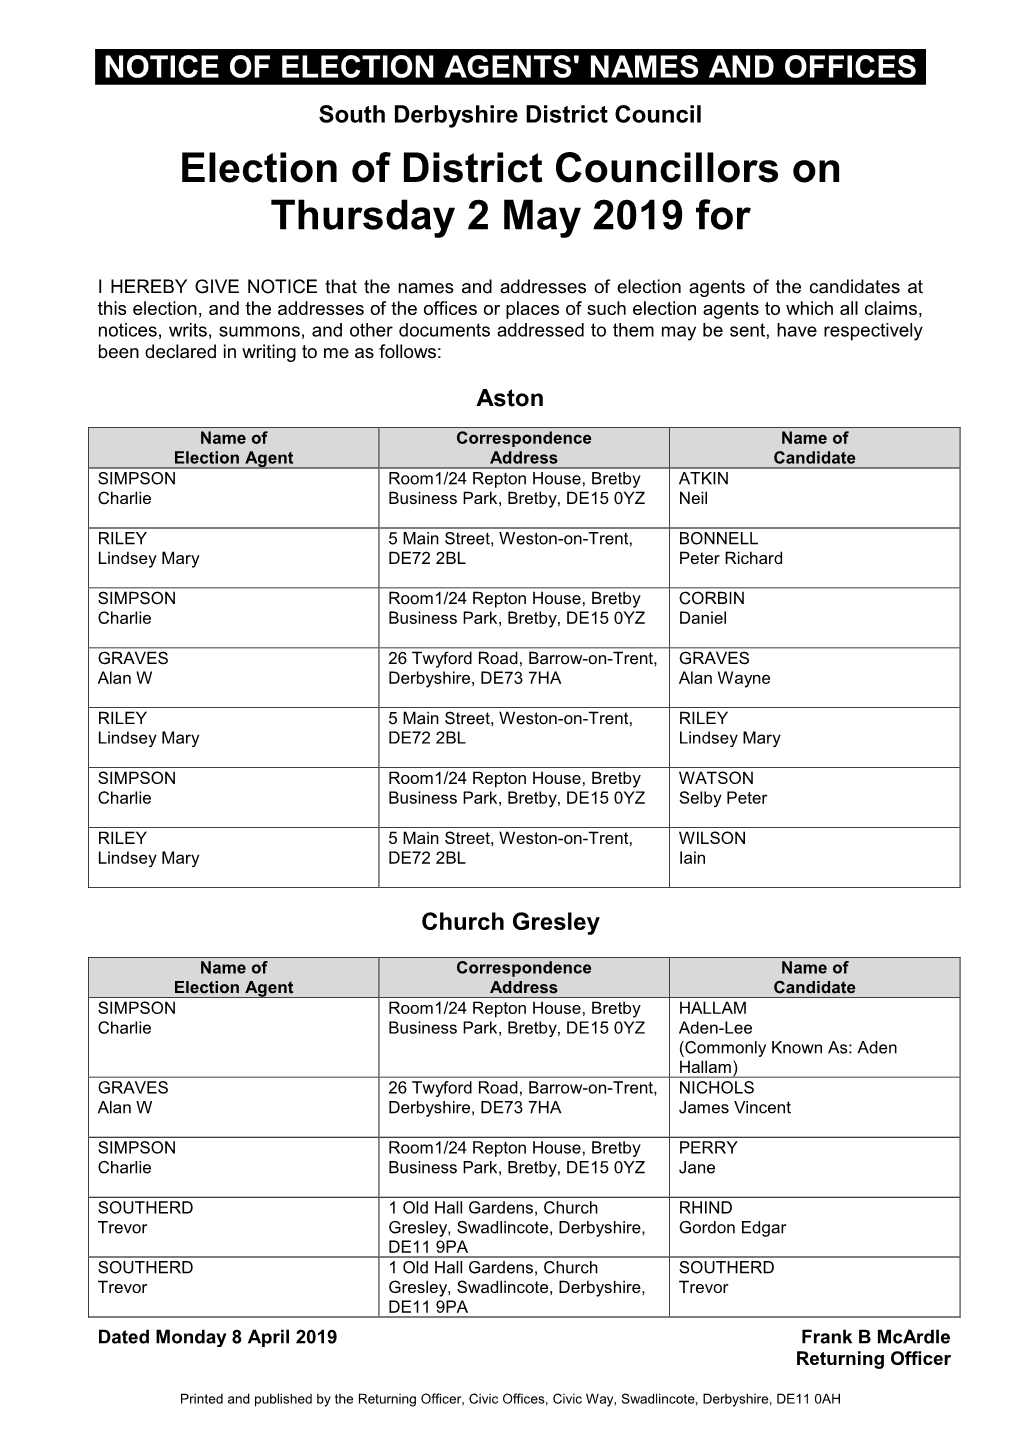 Election of District Councillors on Thursday 2 May 2019 For